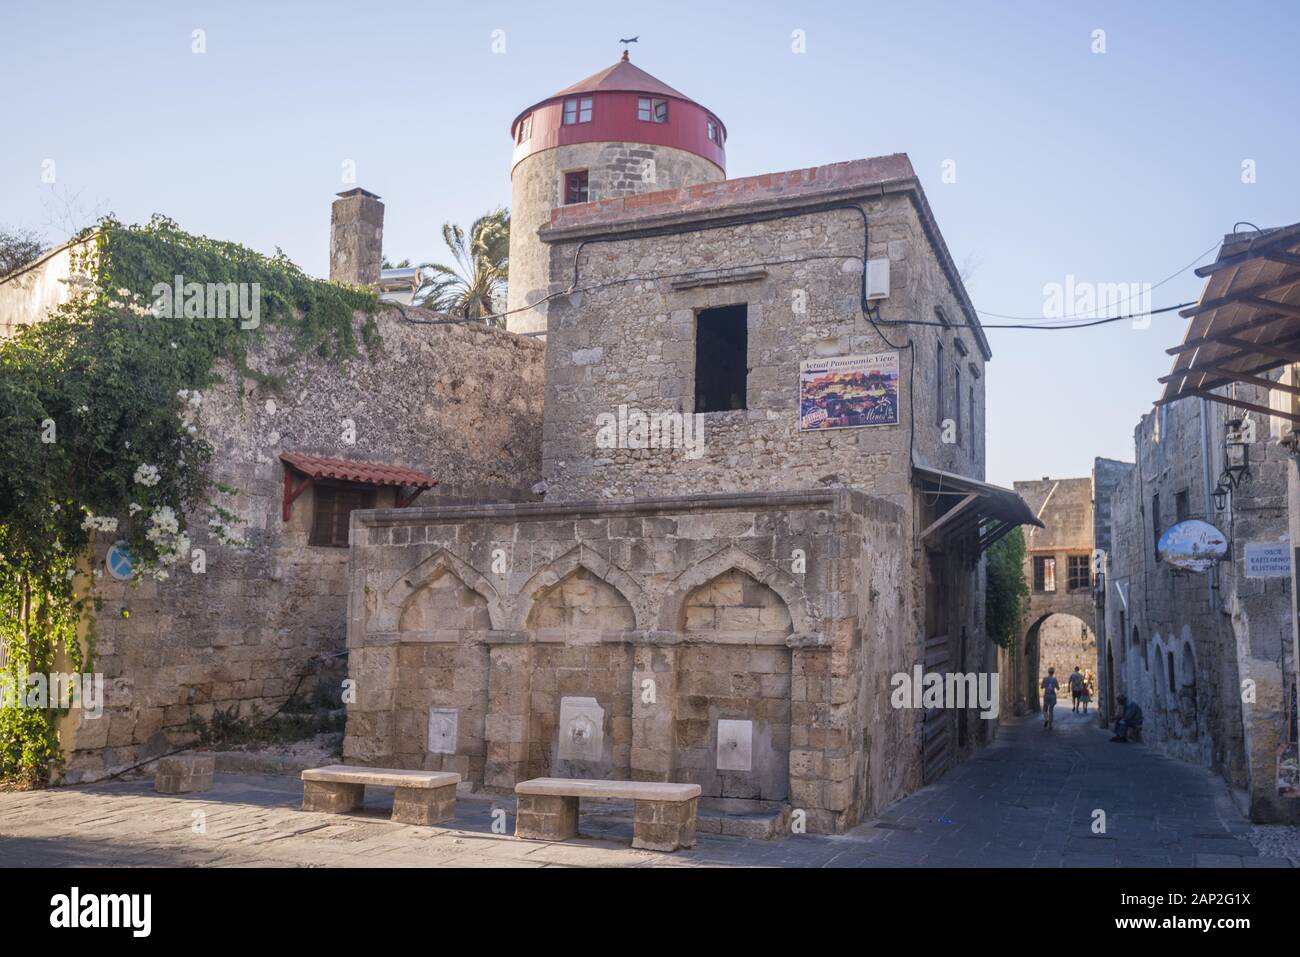 Three fountains on the facade of an old building in the medieval city inside of Fortifications of Rhodes. Stock Photo